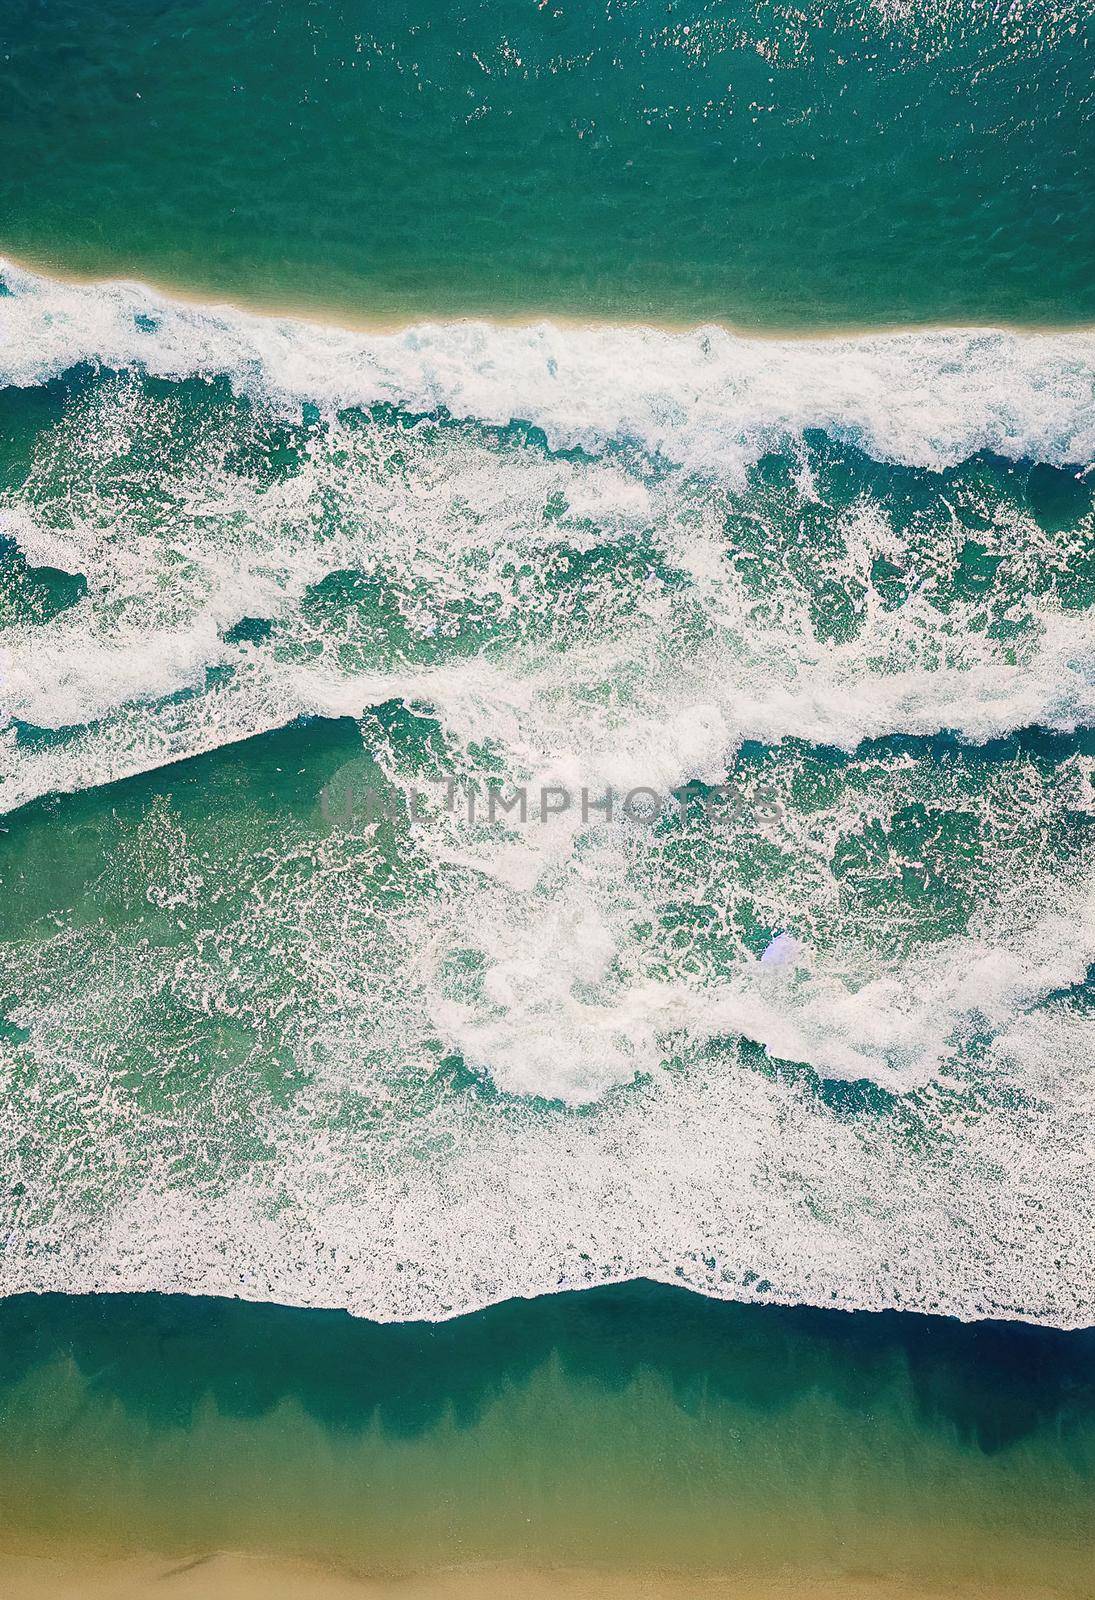 Beach and waves from above. ater background from the top. Summer attacks from the air. Aerial view of a blue ocean